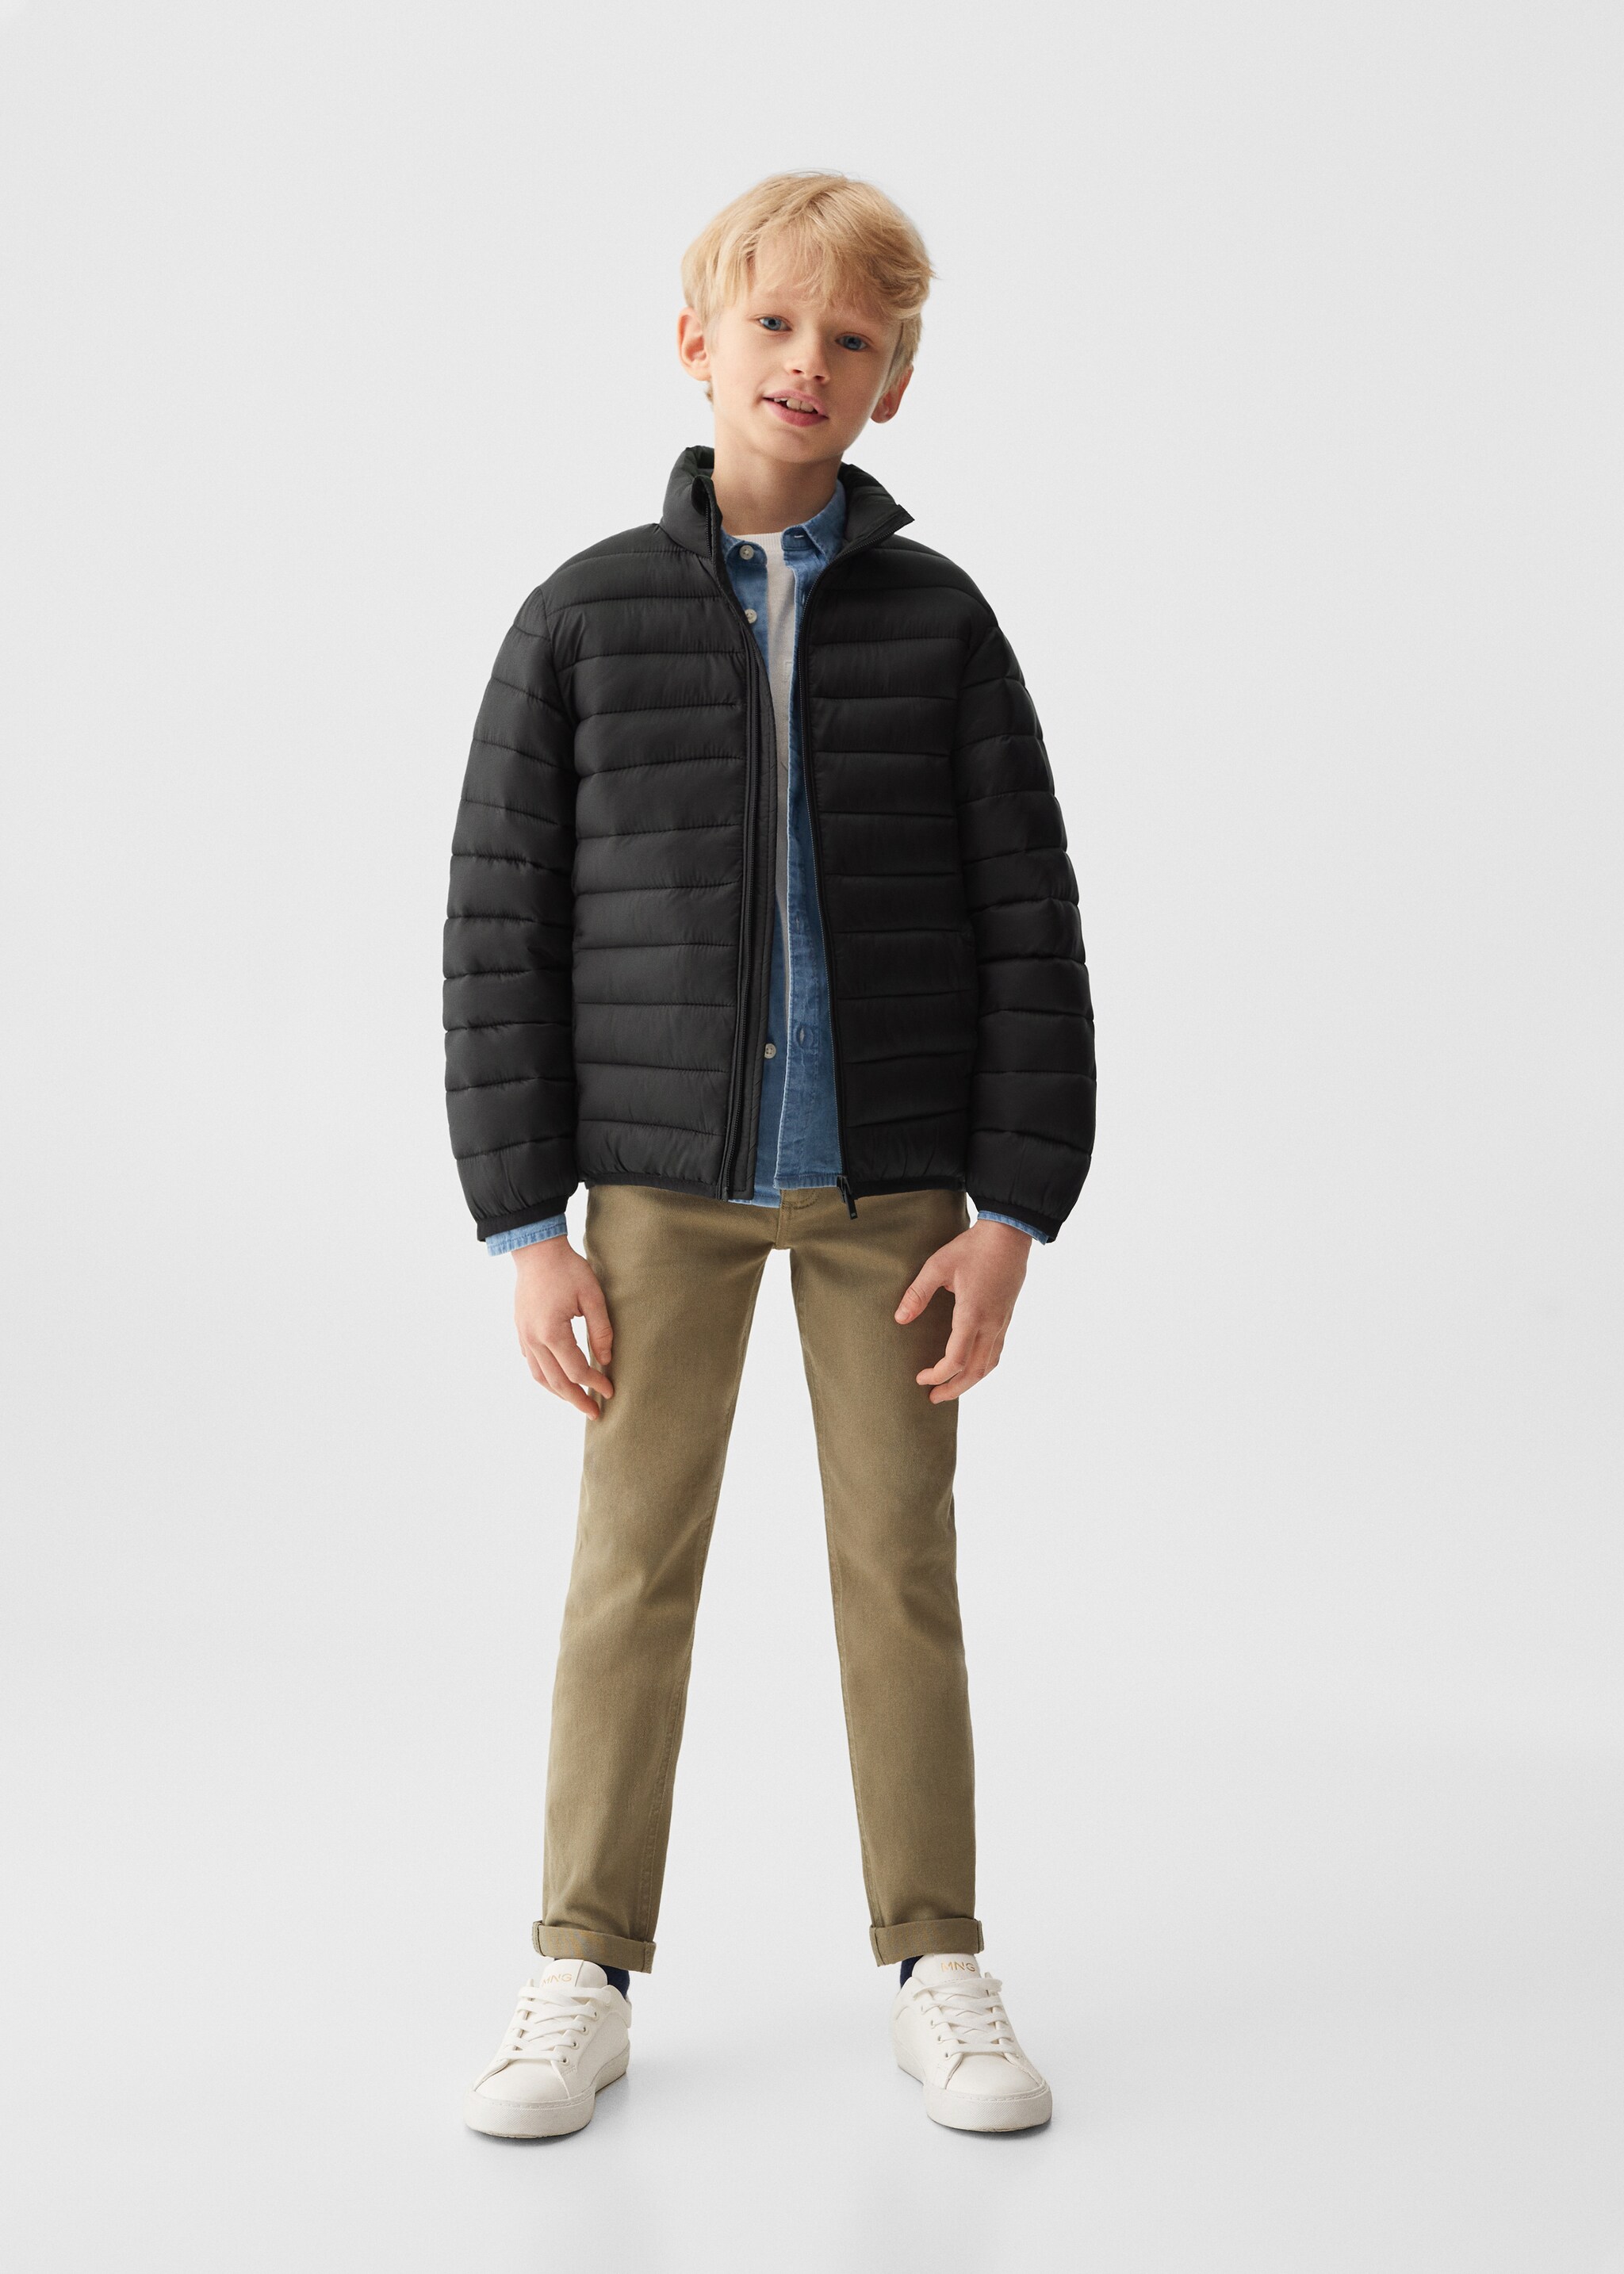 Quilted jacket - General plane